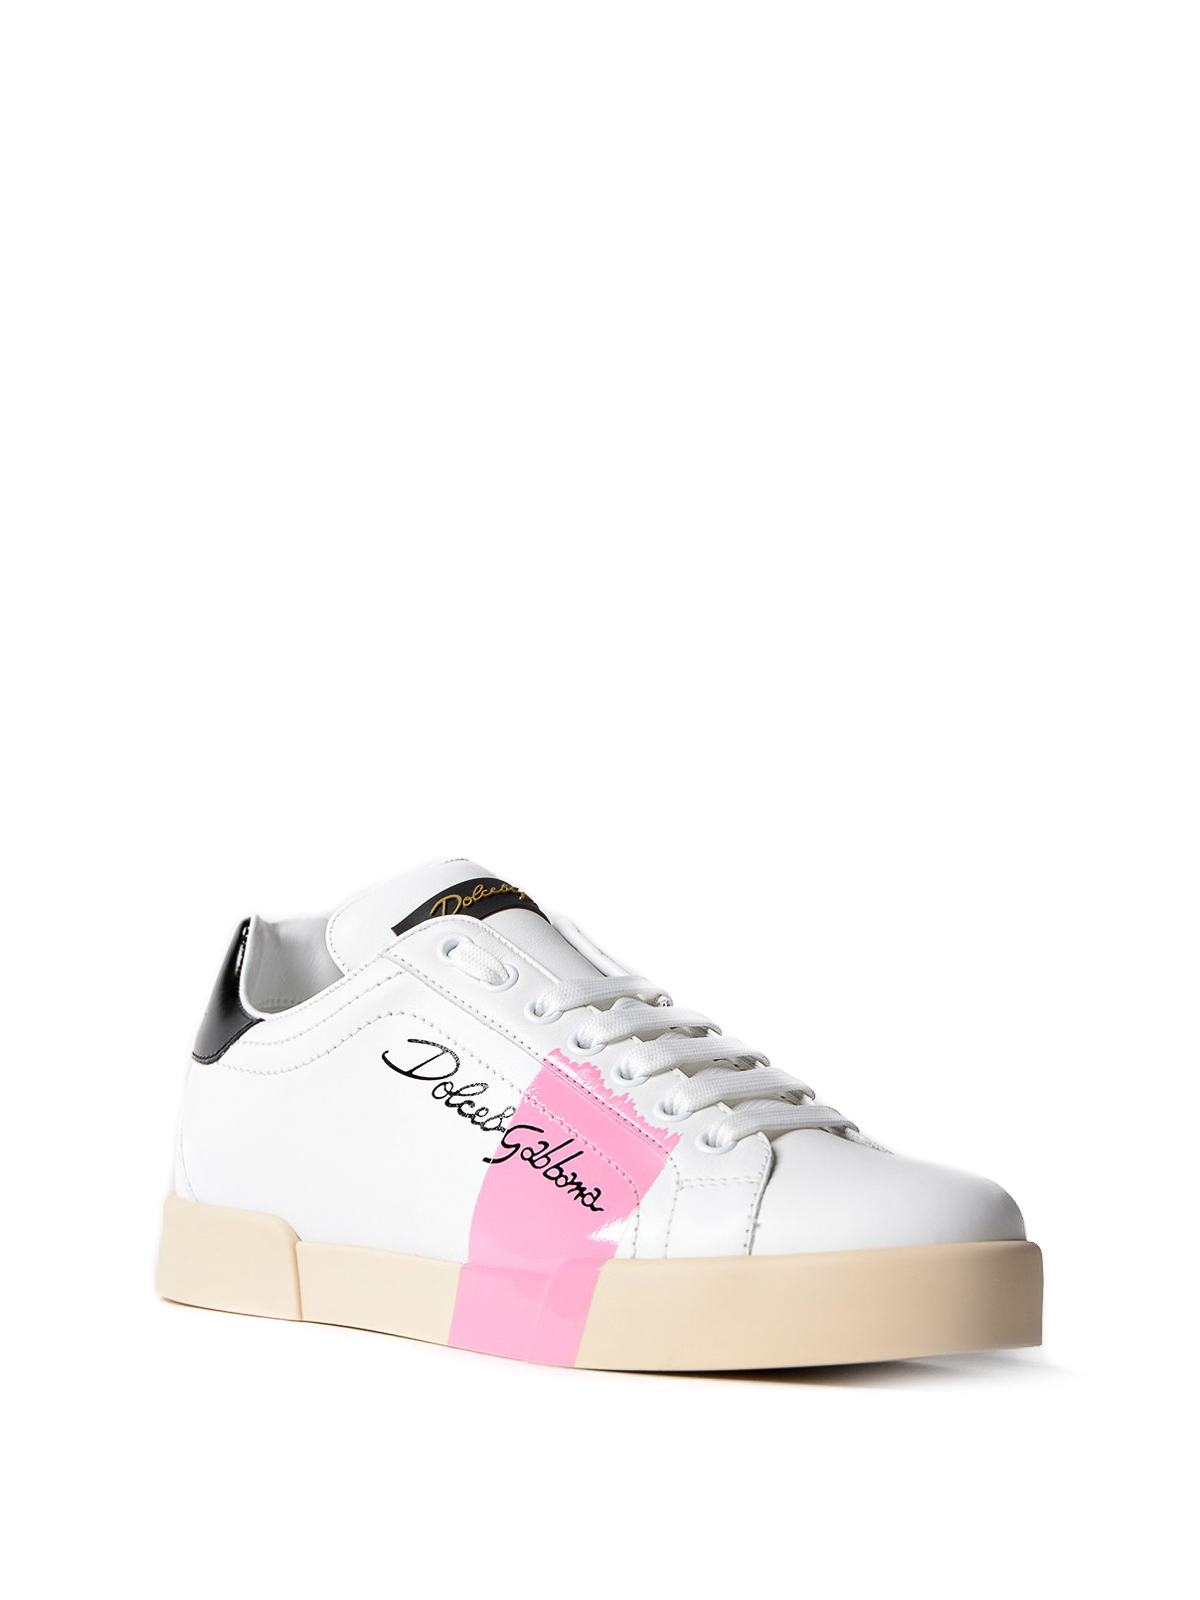 dolce and gabbana pink trainers